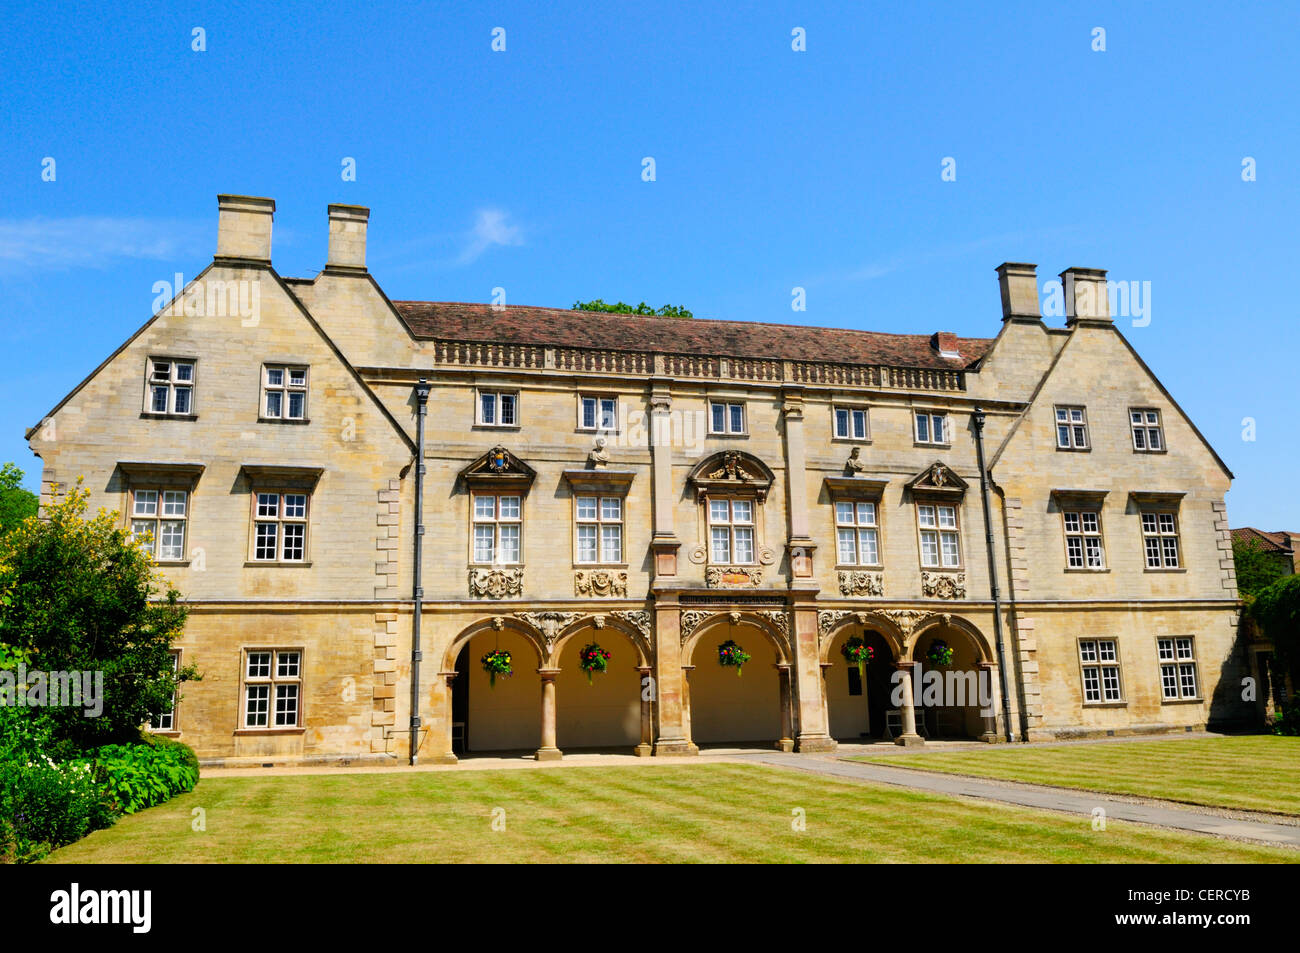 The Pepys Building at Magdalene College, a constituent college of the University of Cambridge. The building holds the Pepys Libr Stock Photo